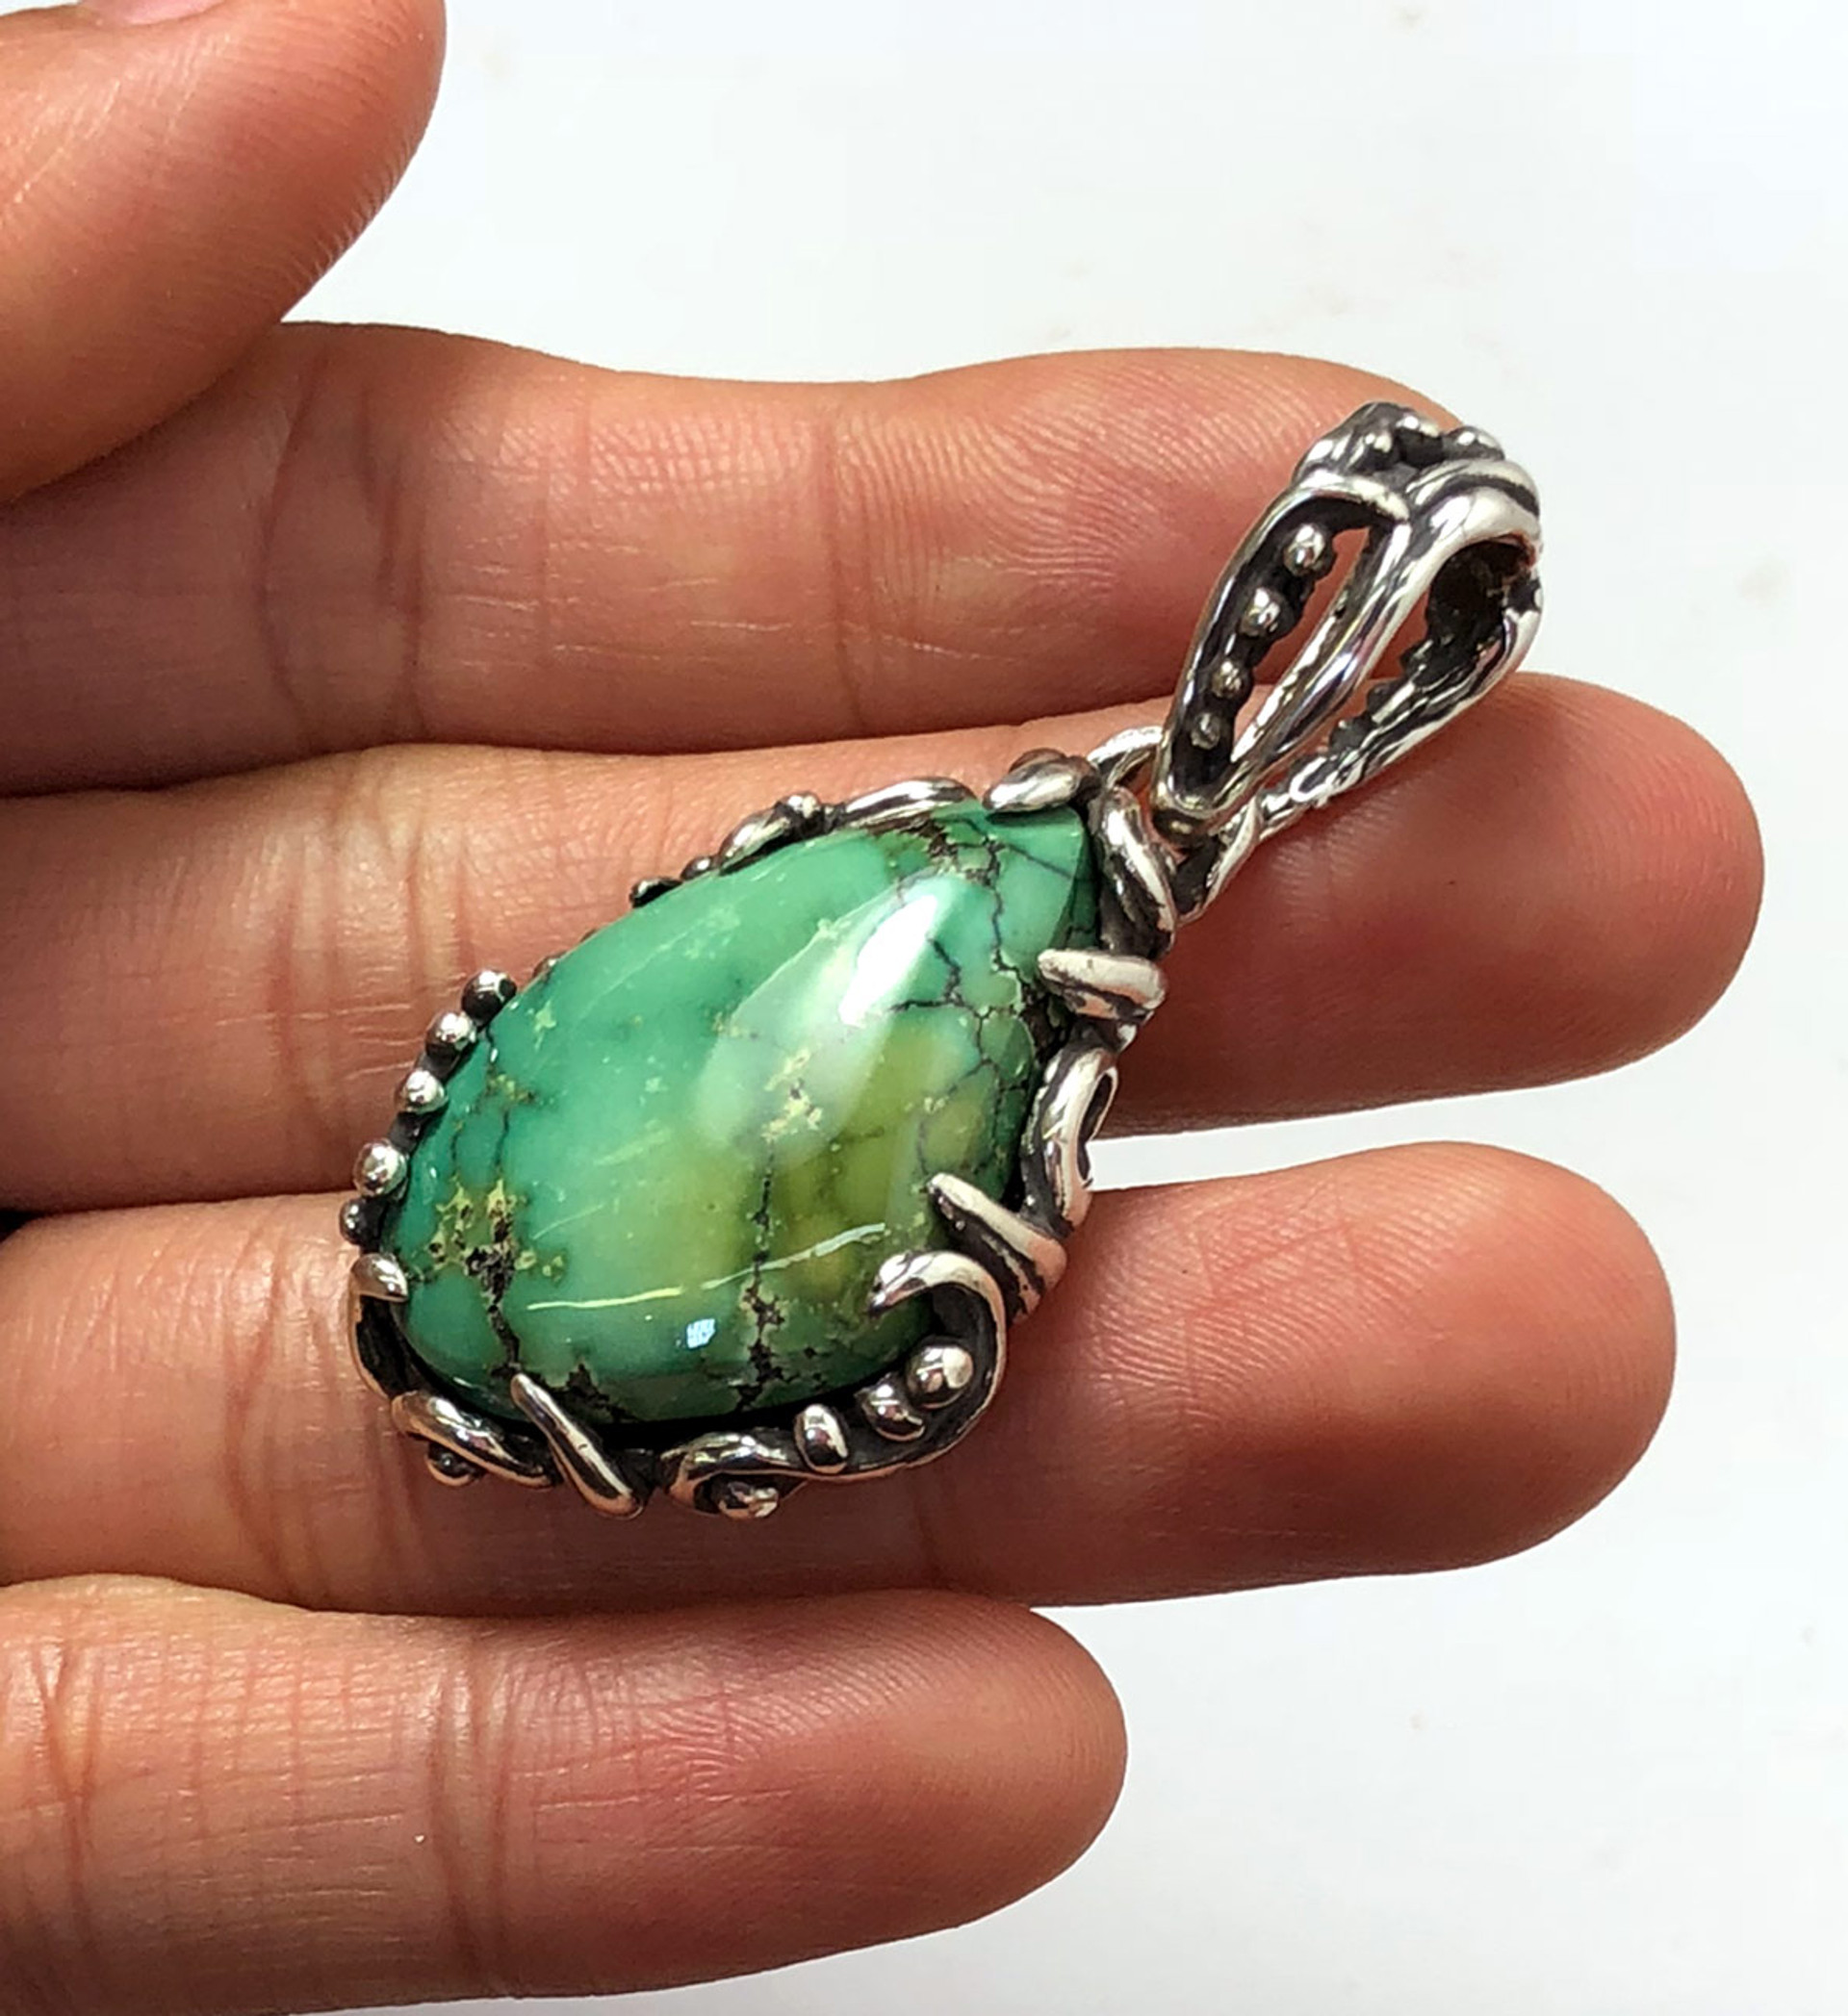 Polychrome Lime Green Turquoise Pendant